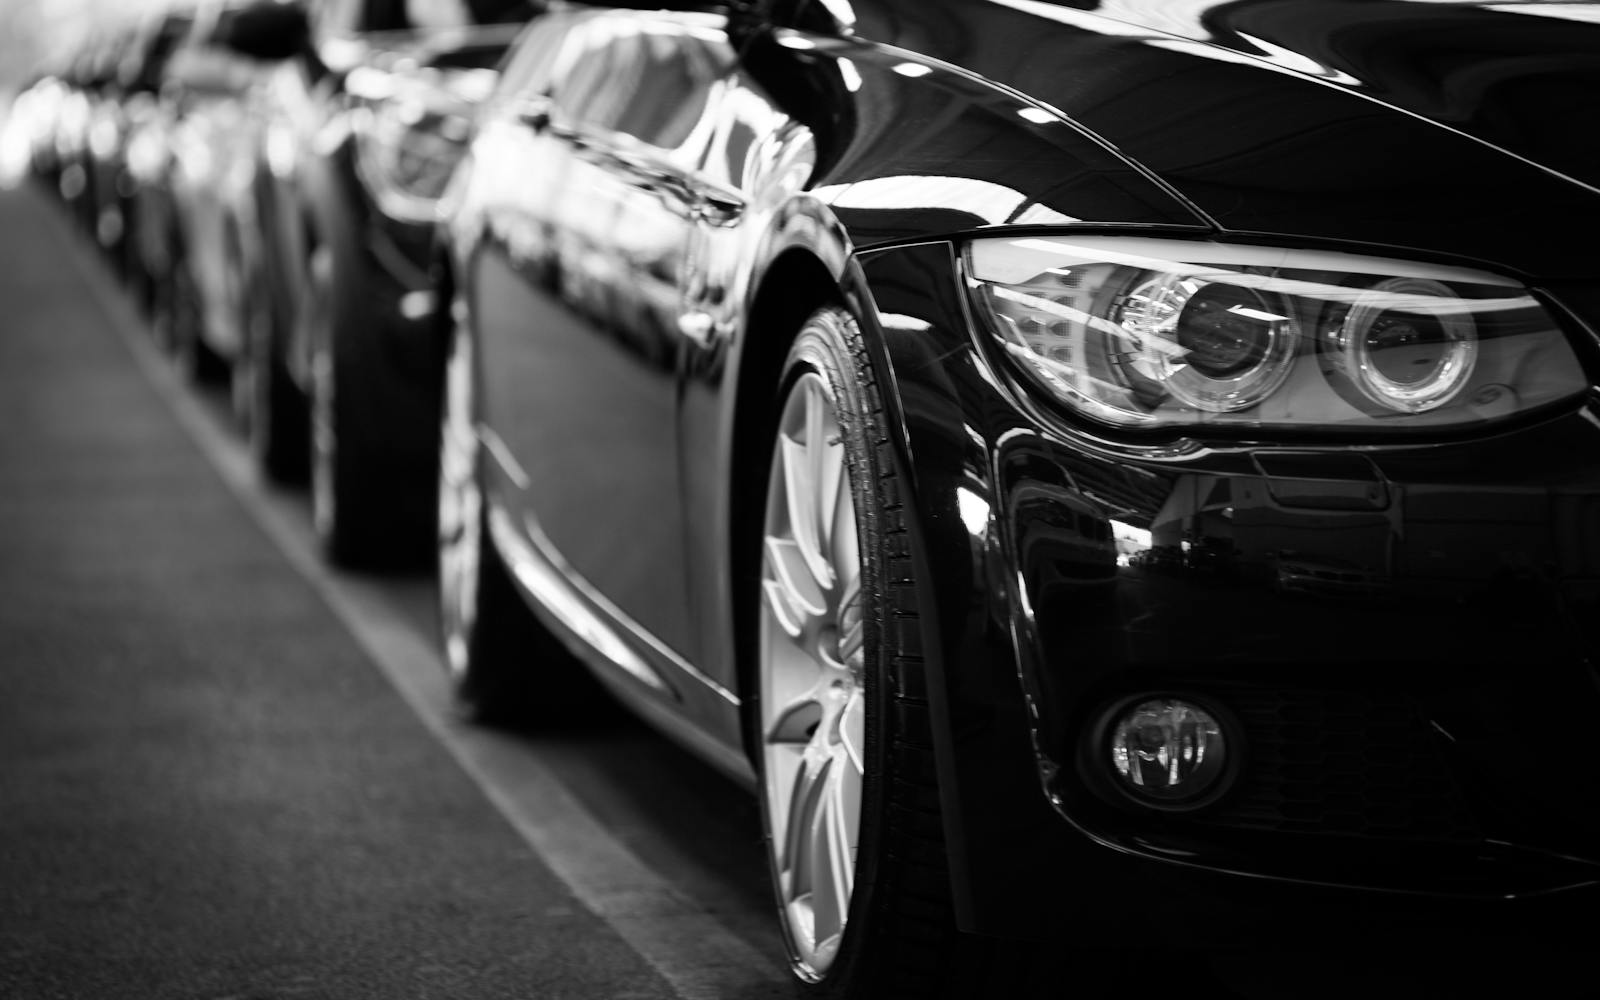 black and white photo of cars parked on the street